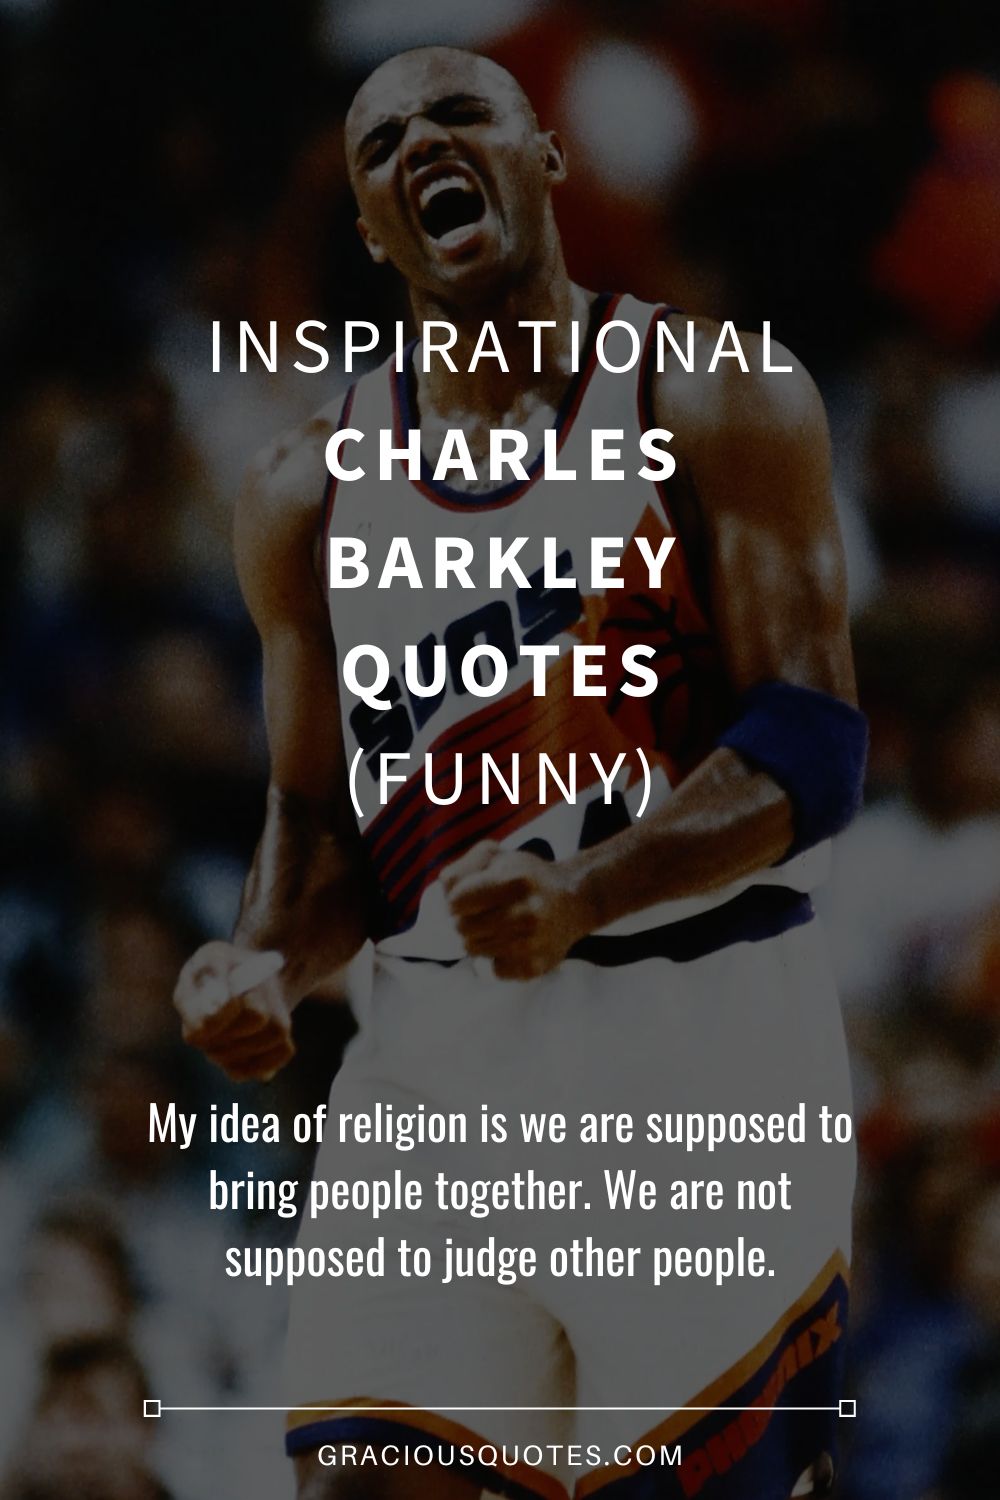 quotes from famous athletes